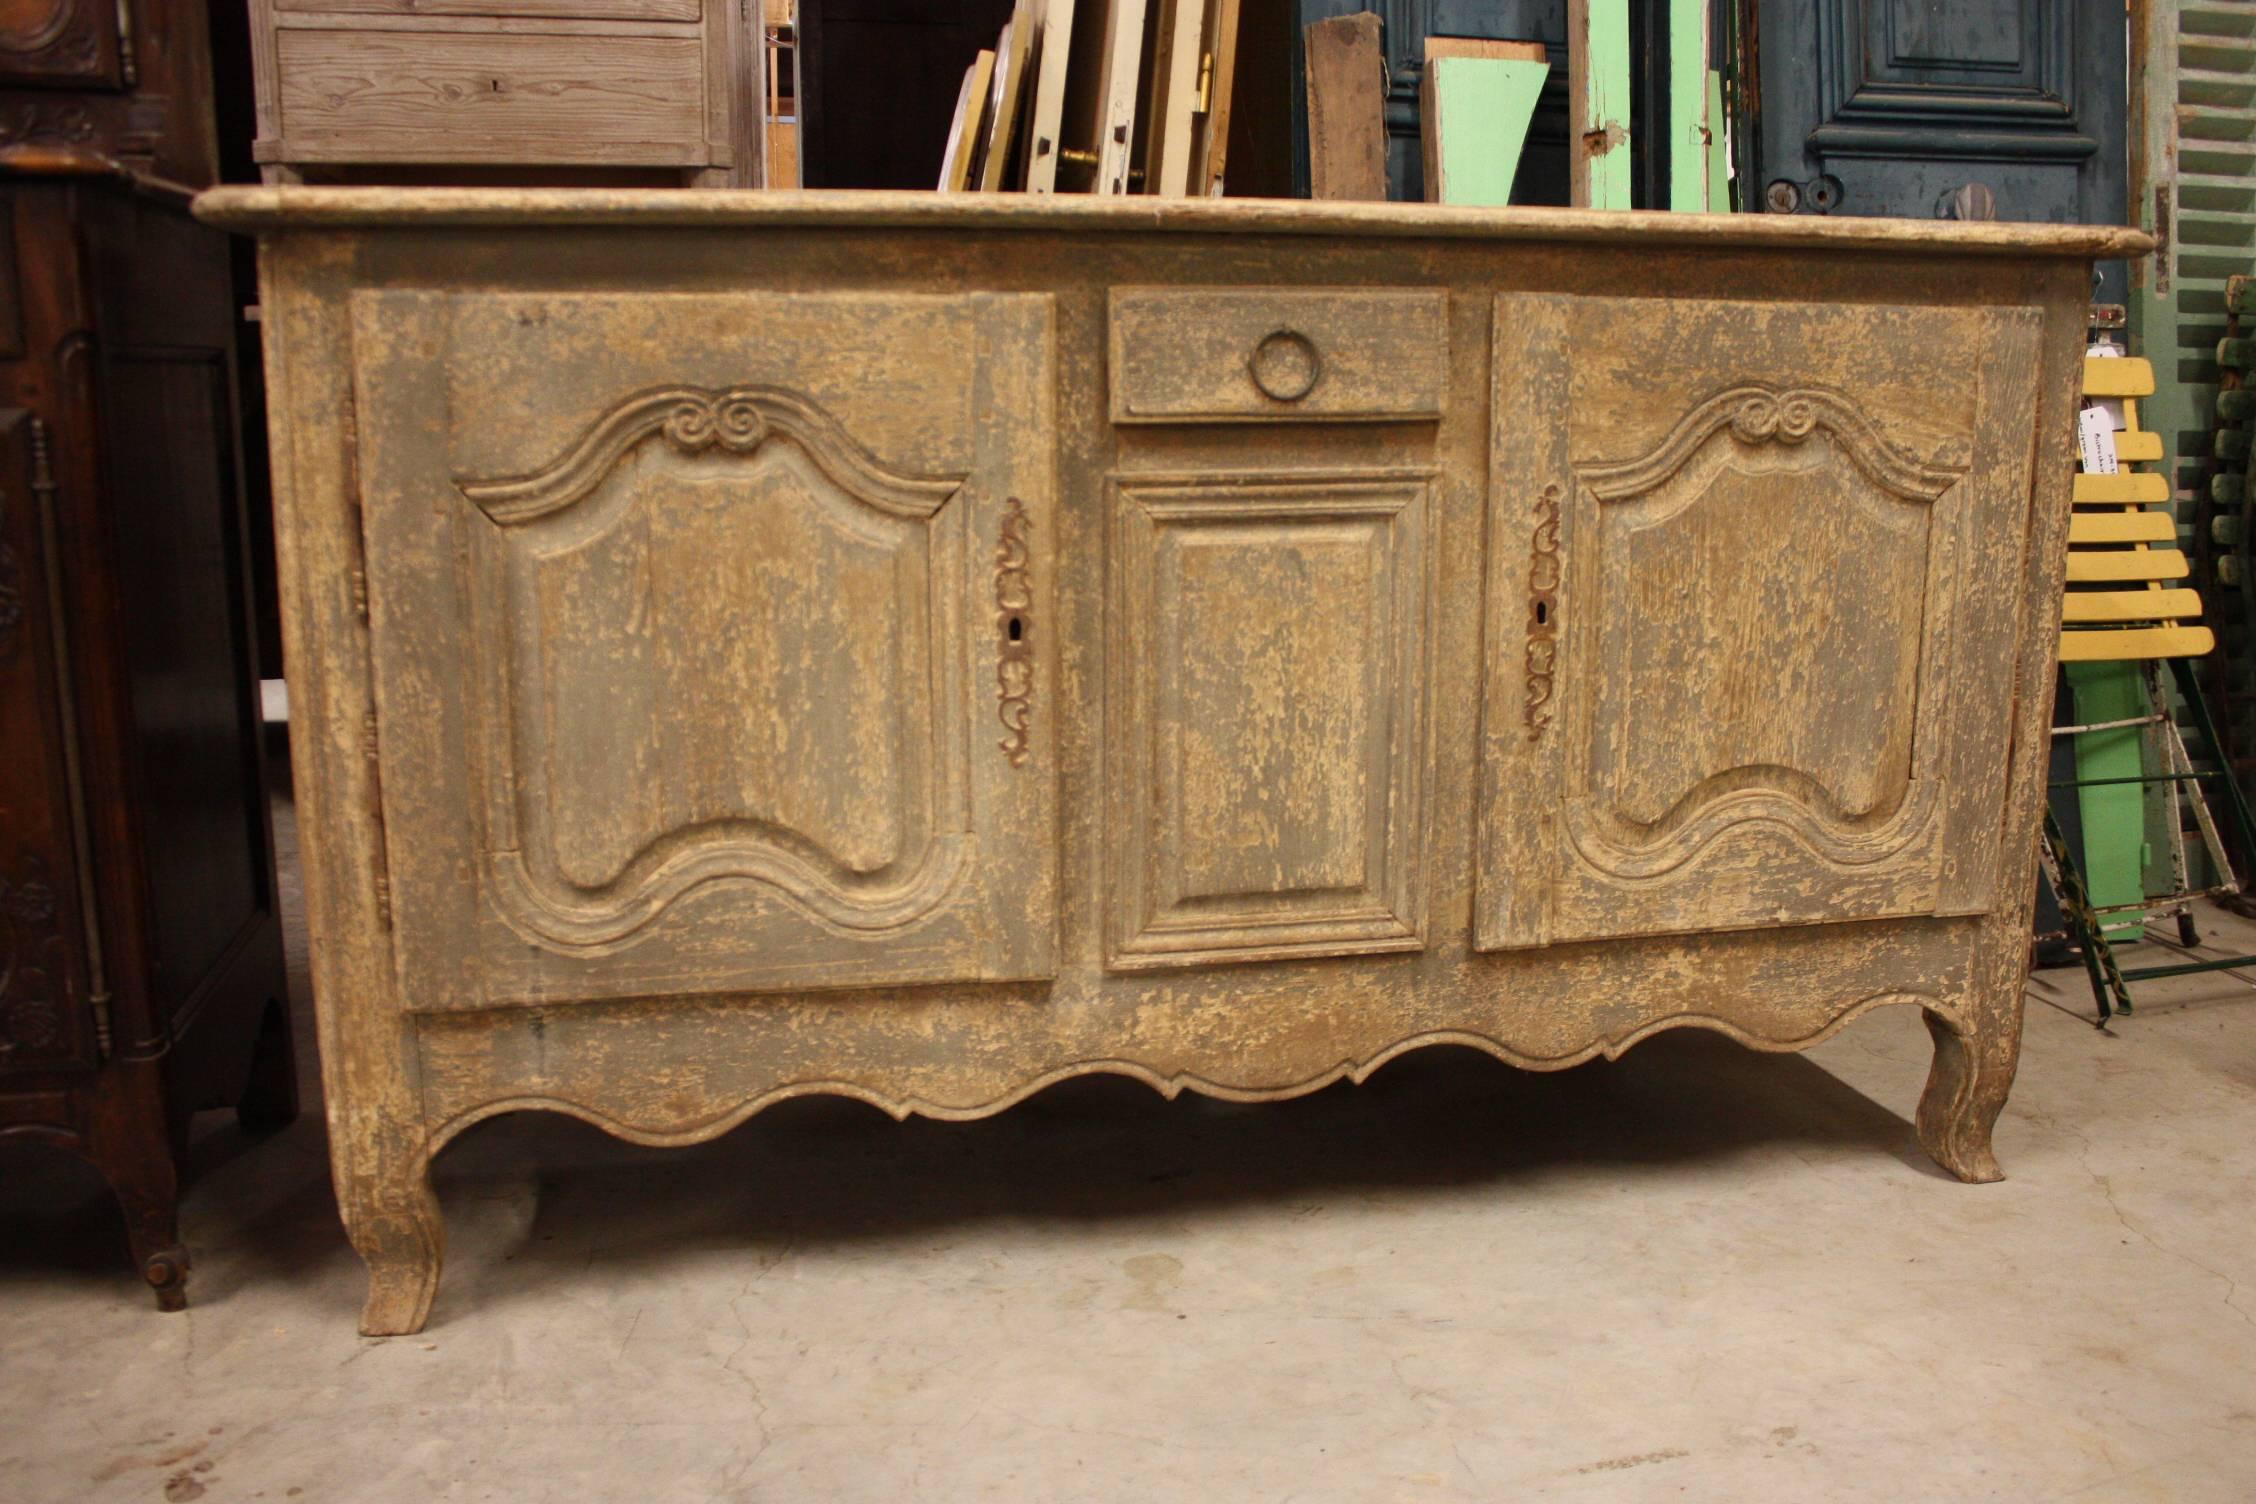 Beautifully carved Louis XV style enfilade with one drawer and two doors. Original locks with keys. Painted in a soft blue washed patina and has wonderful dimensions, 19th century.